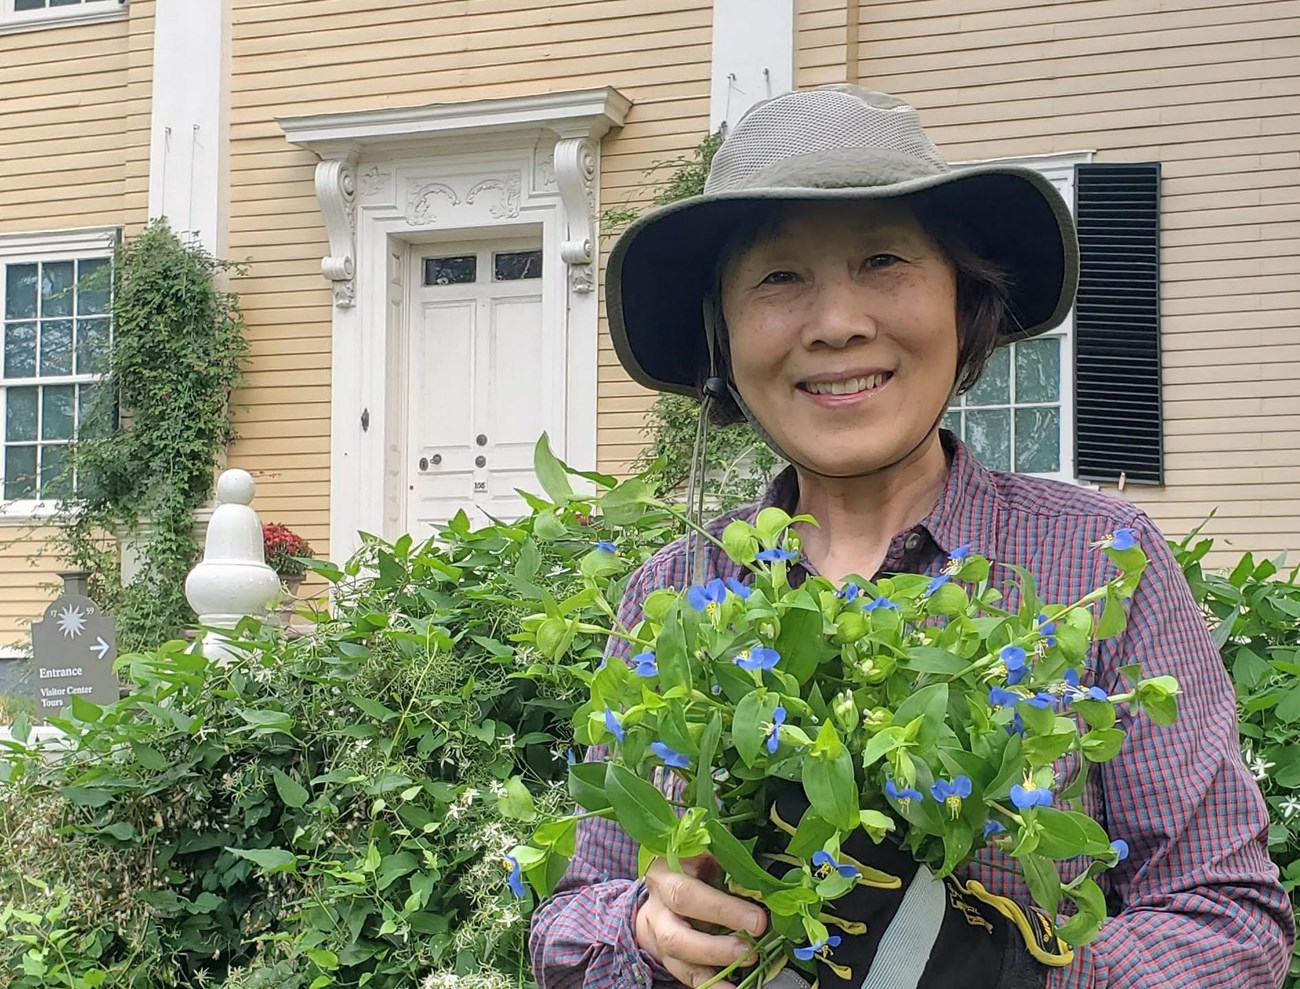 A volunteer in a sun hat and gardening clothes holds a plant, standing in a garden in front of a brick house.